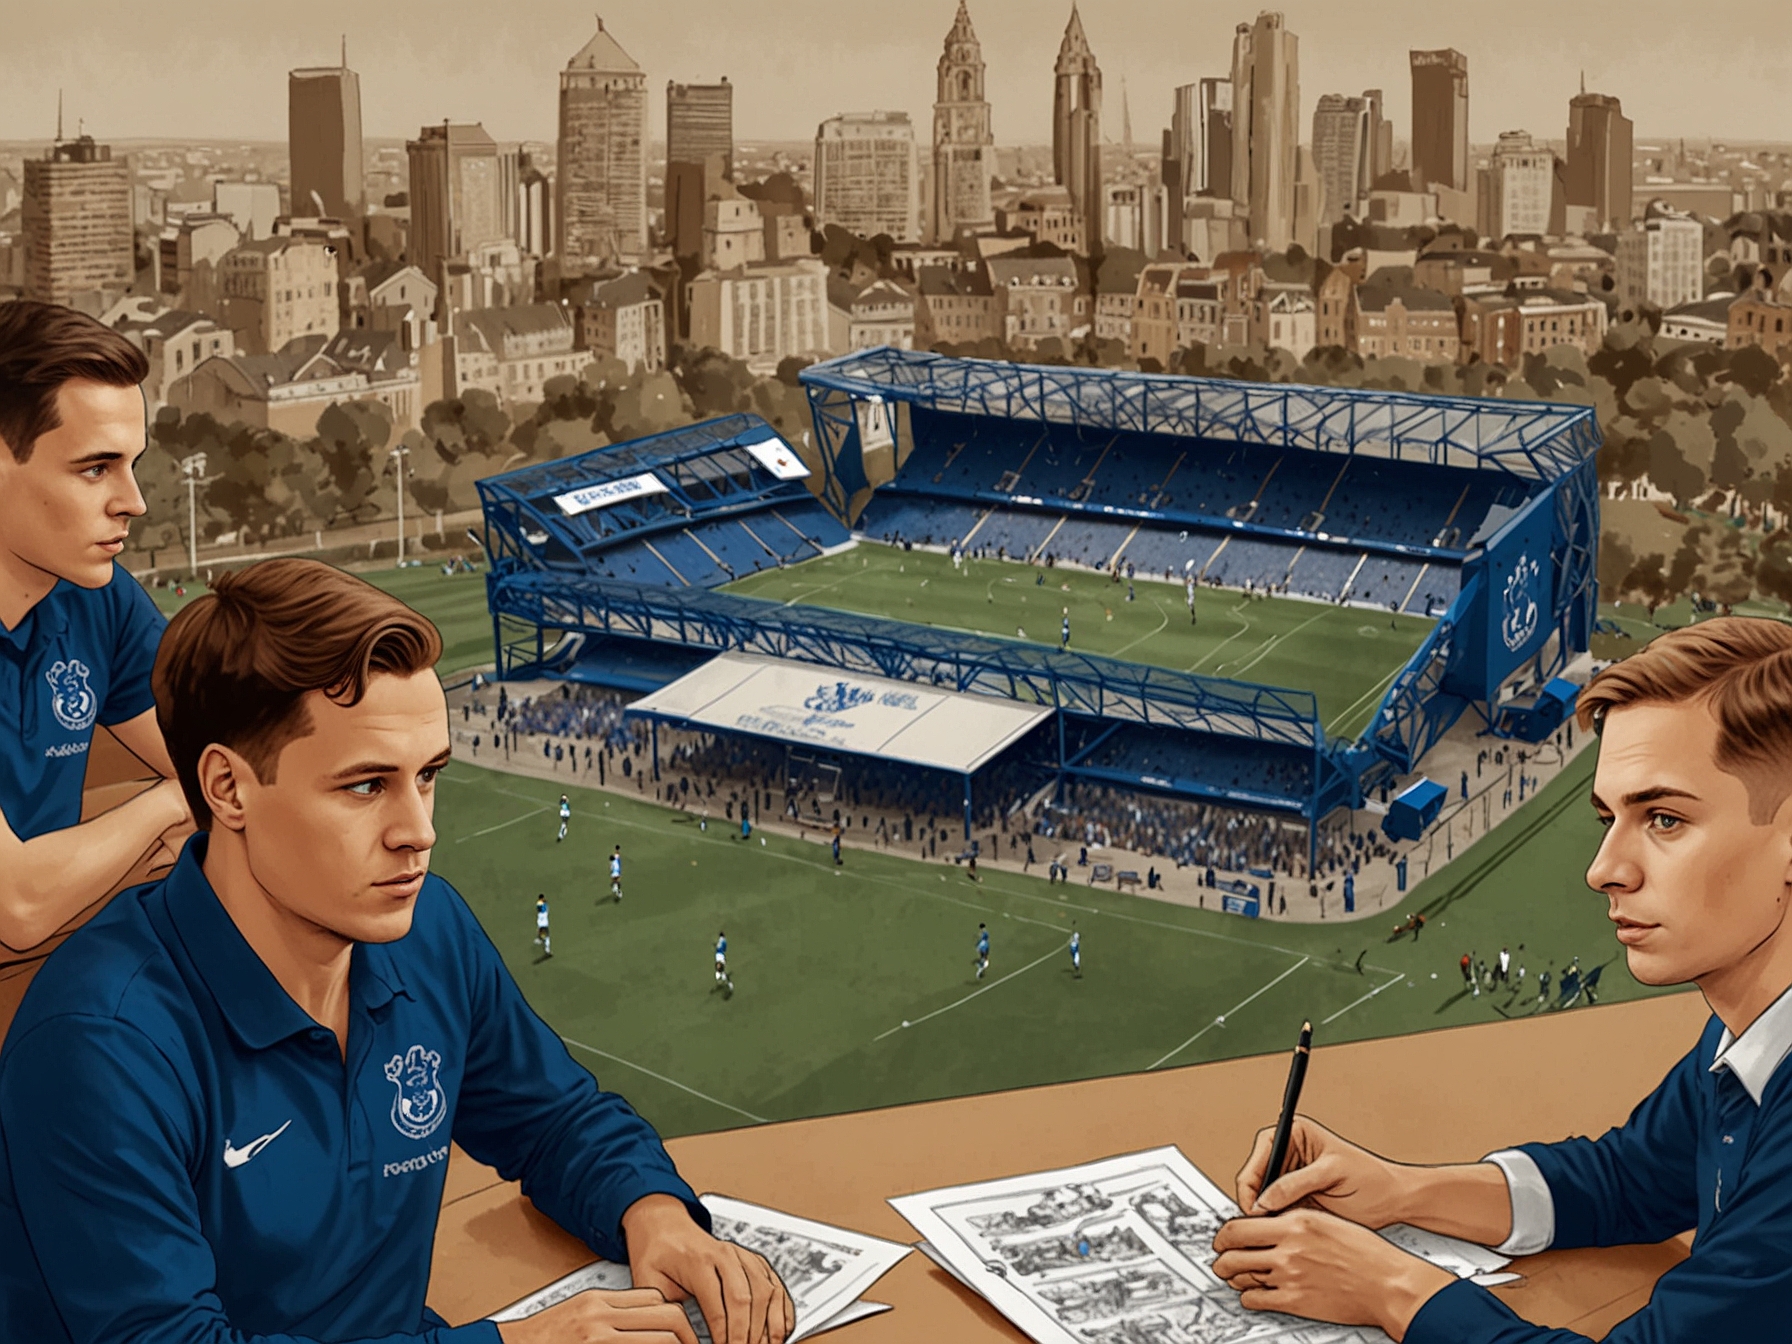 A top view of Everton's summer transfer dealings, showcasing key player movements, potential new signings, and strategic financial plans to stabilize the club's finances.